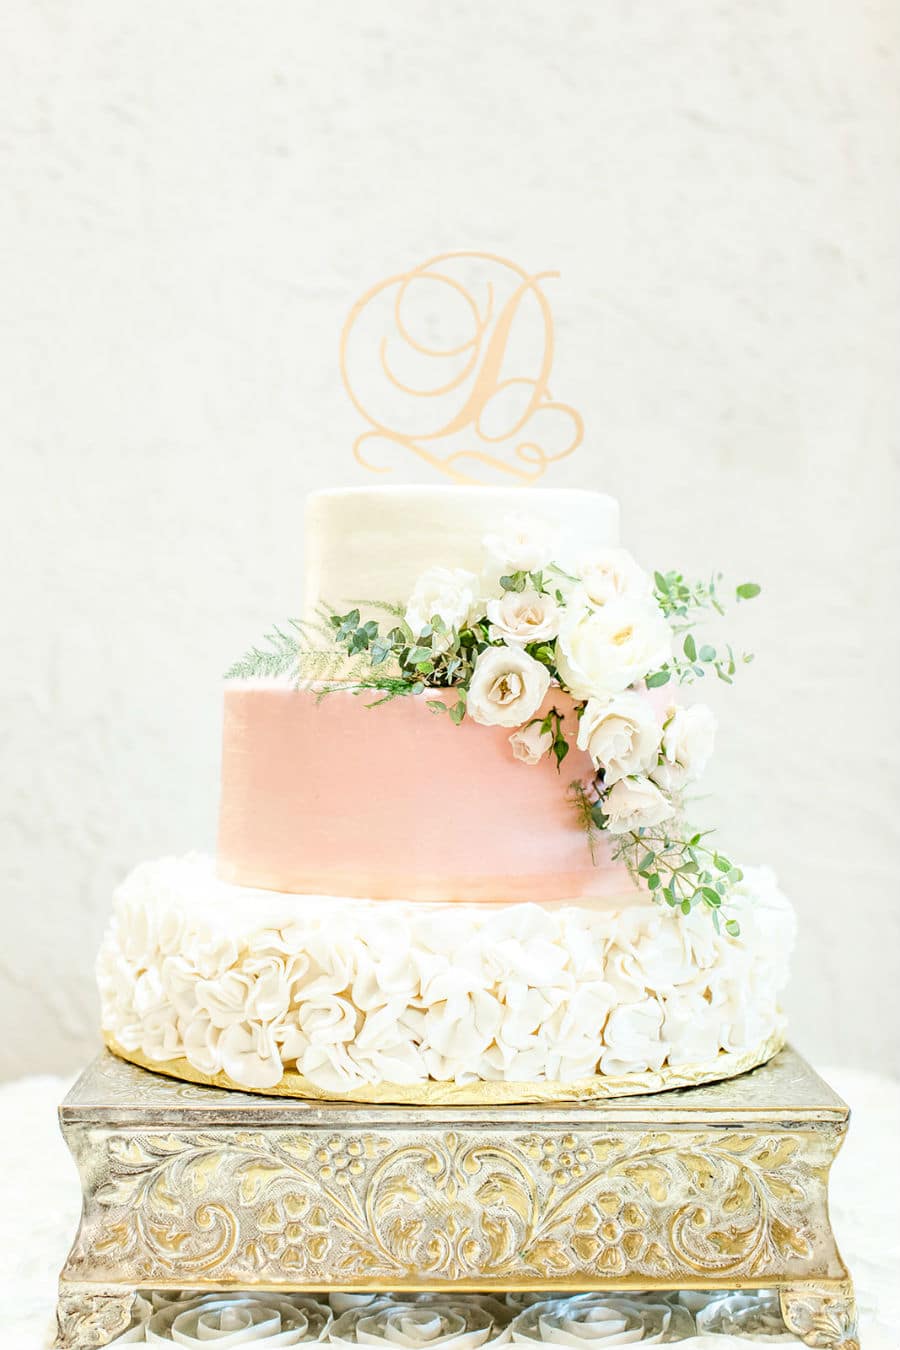 Ornate wedding cake topped with fancy letter D